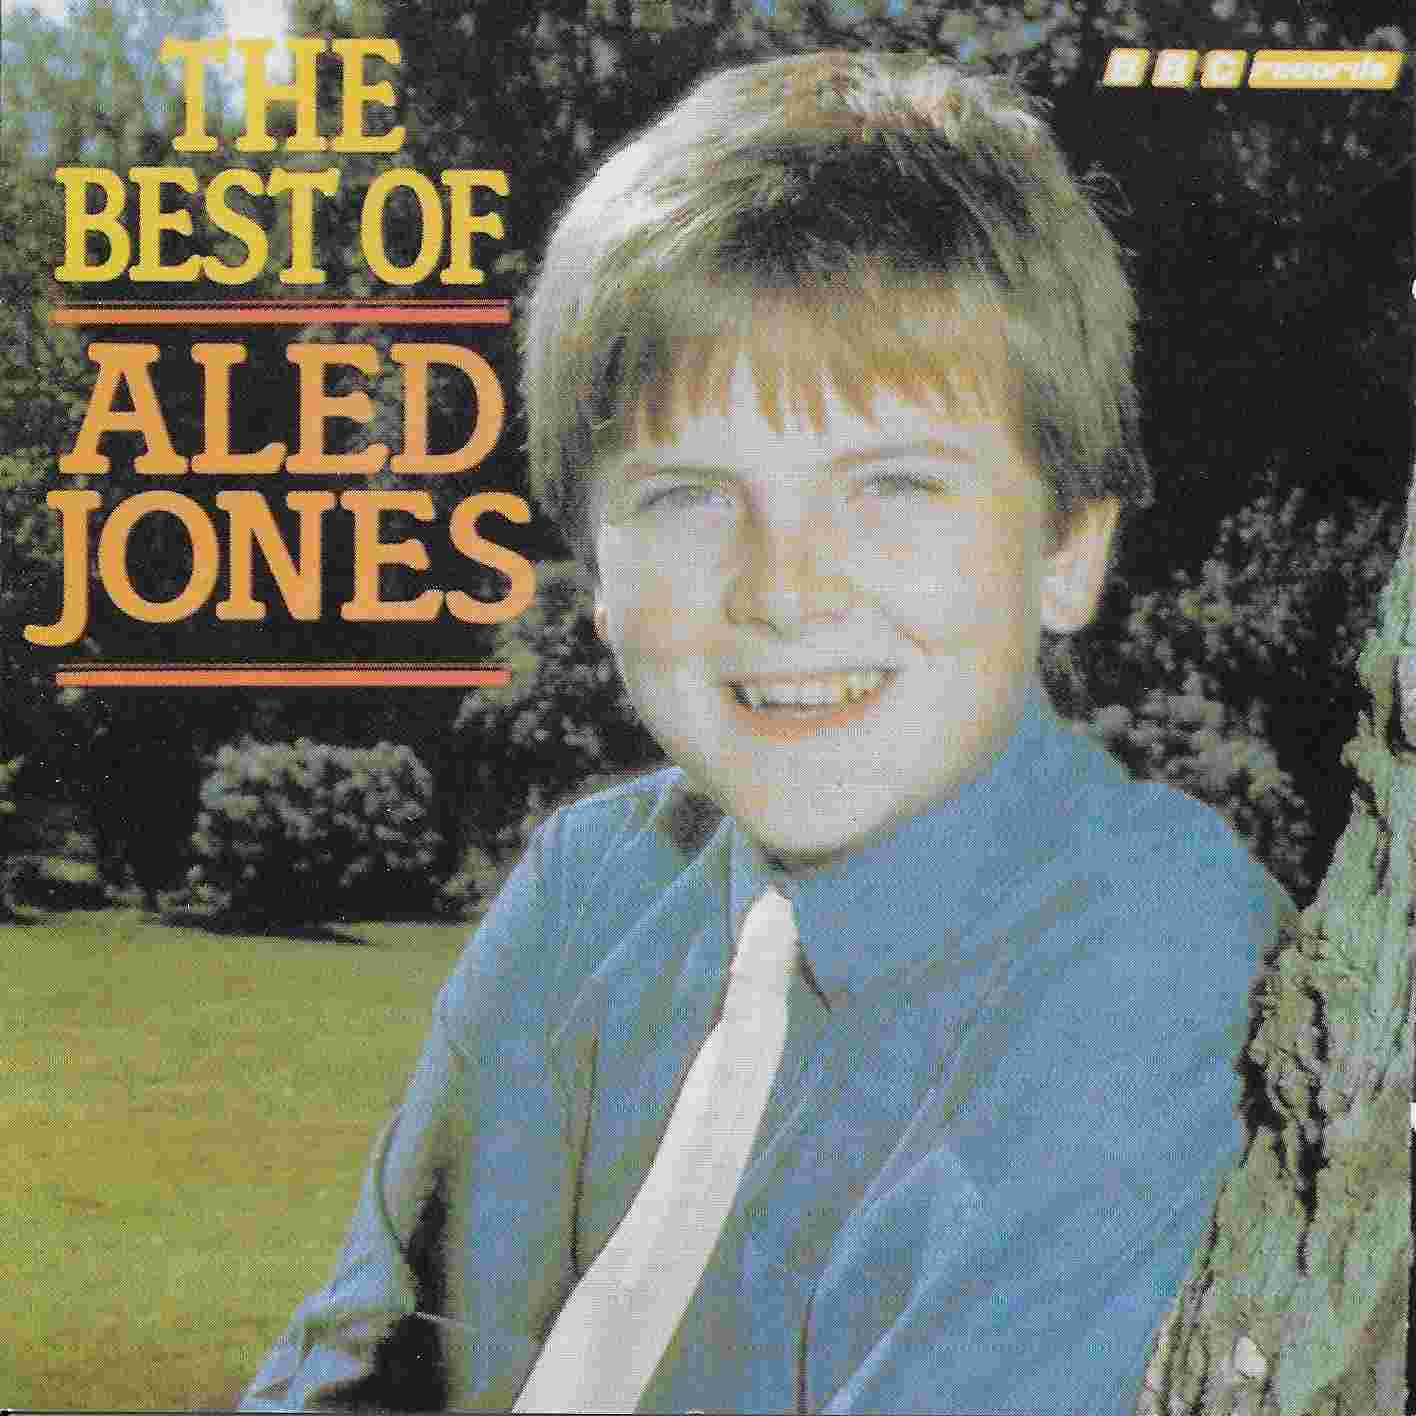 Picture of BBCCD569 The best of Aled Jones by artist Various from the BBC cds - Records and Tapes library